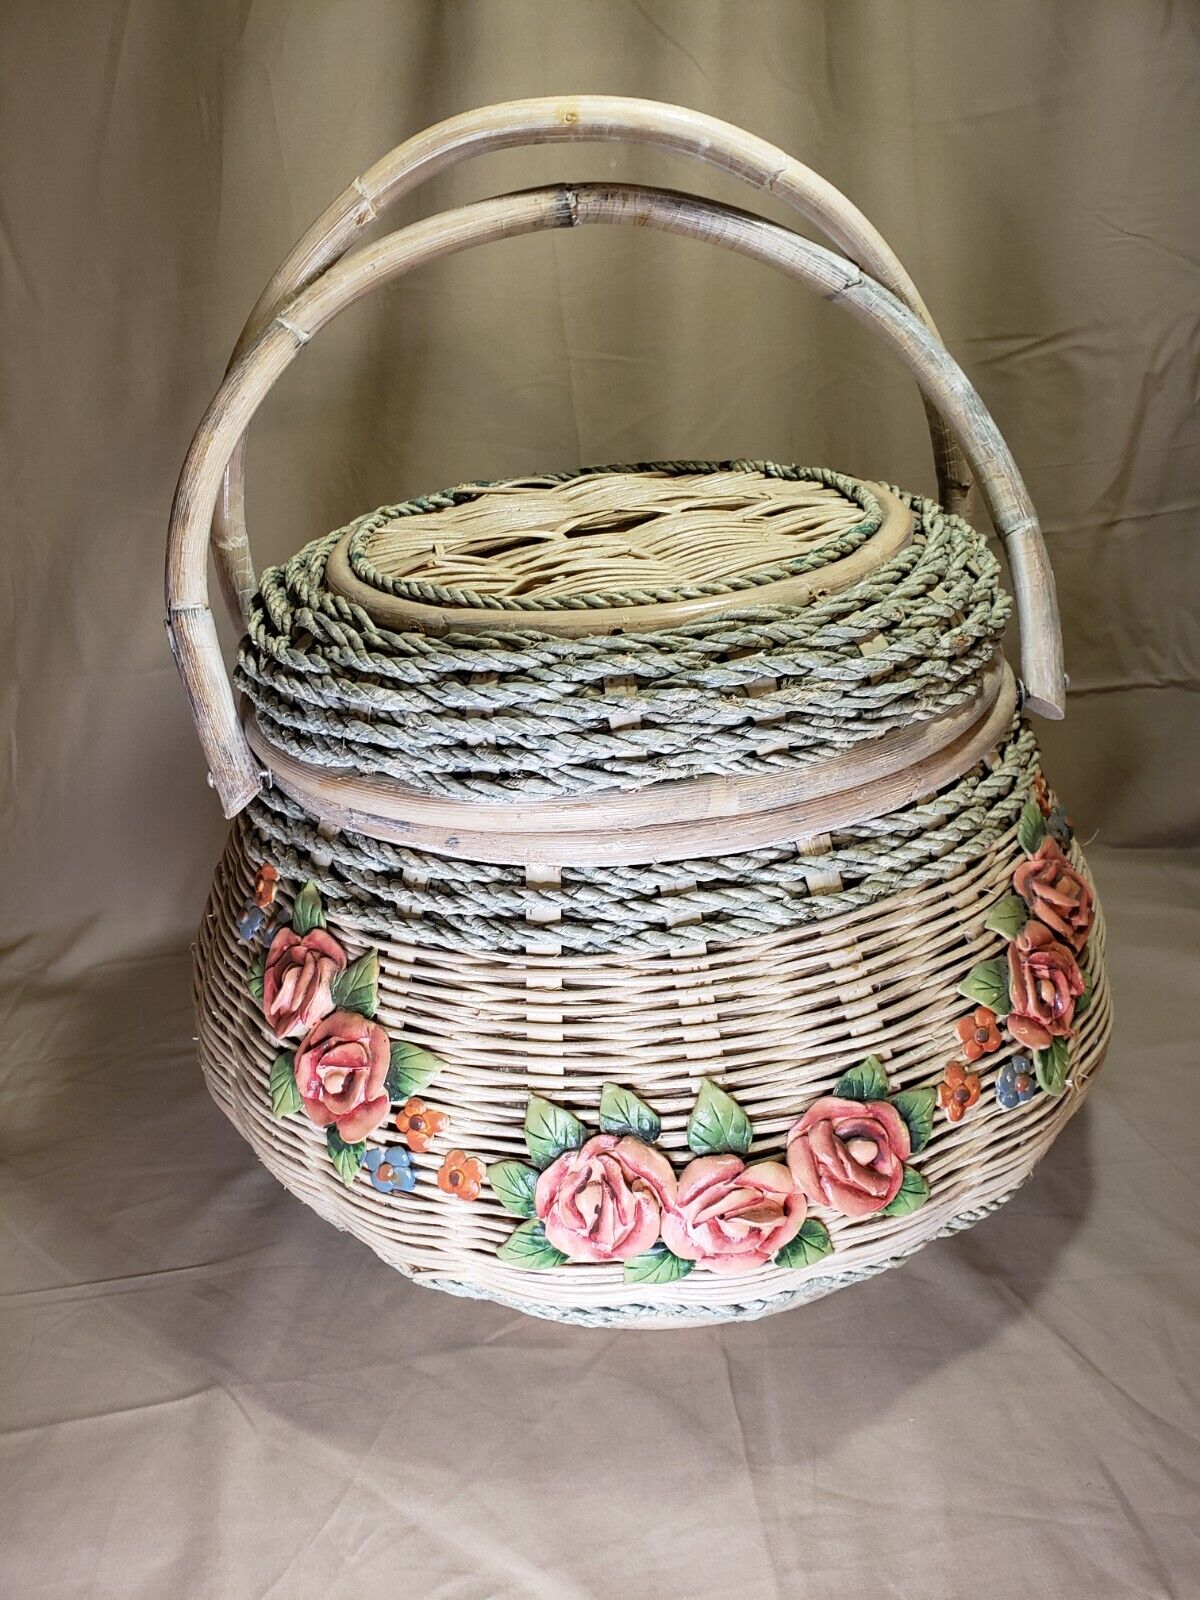 Vintage Wicker Picnic Basket w/ Applied Gesso Barbola Roses & Accessories